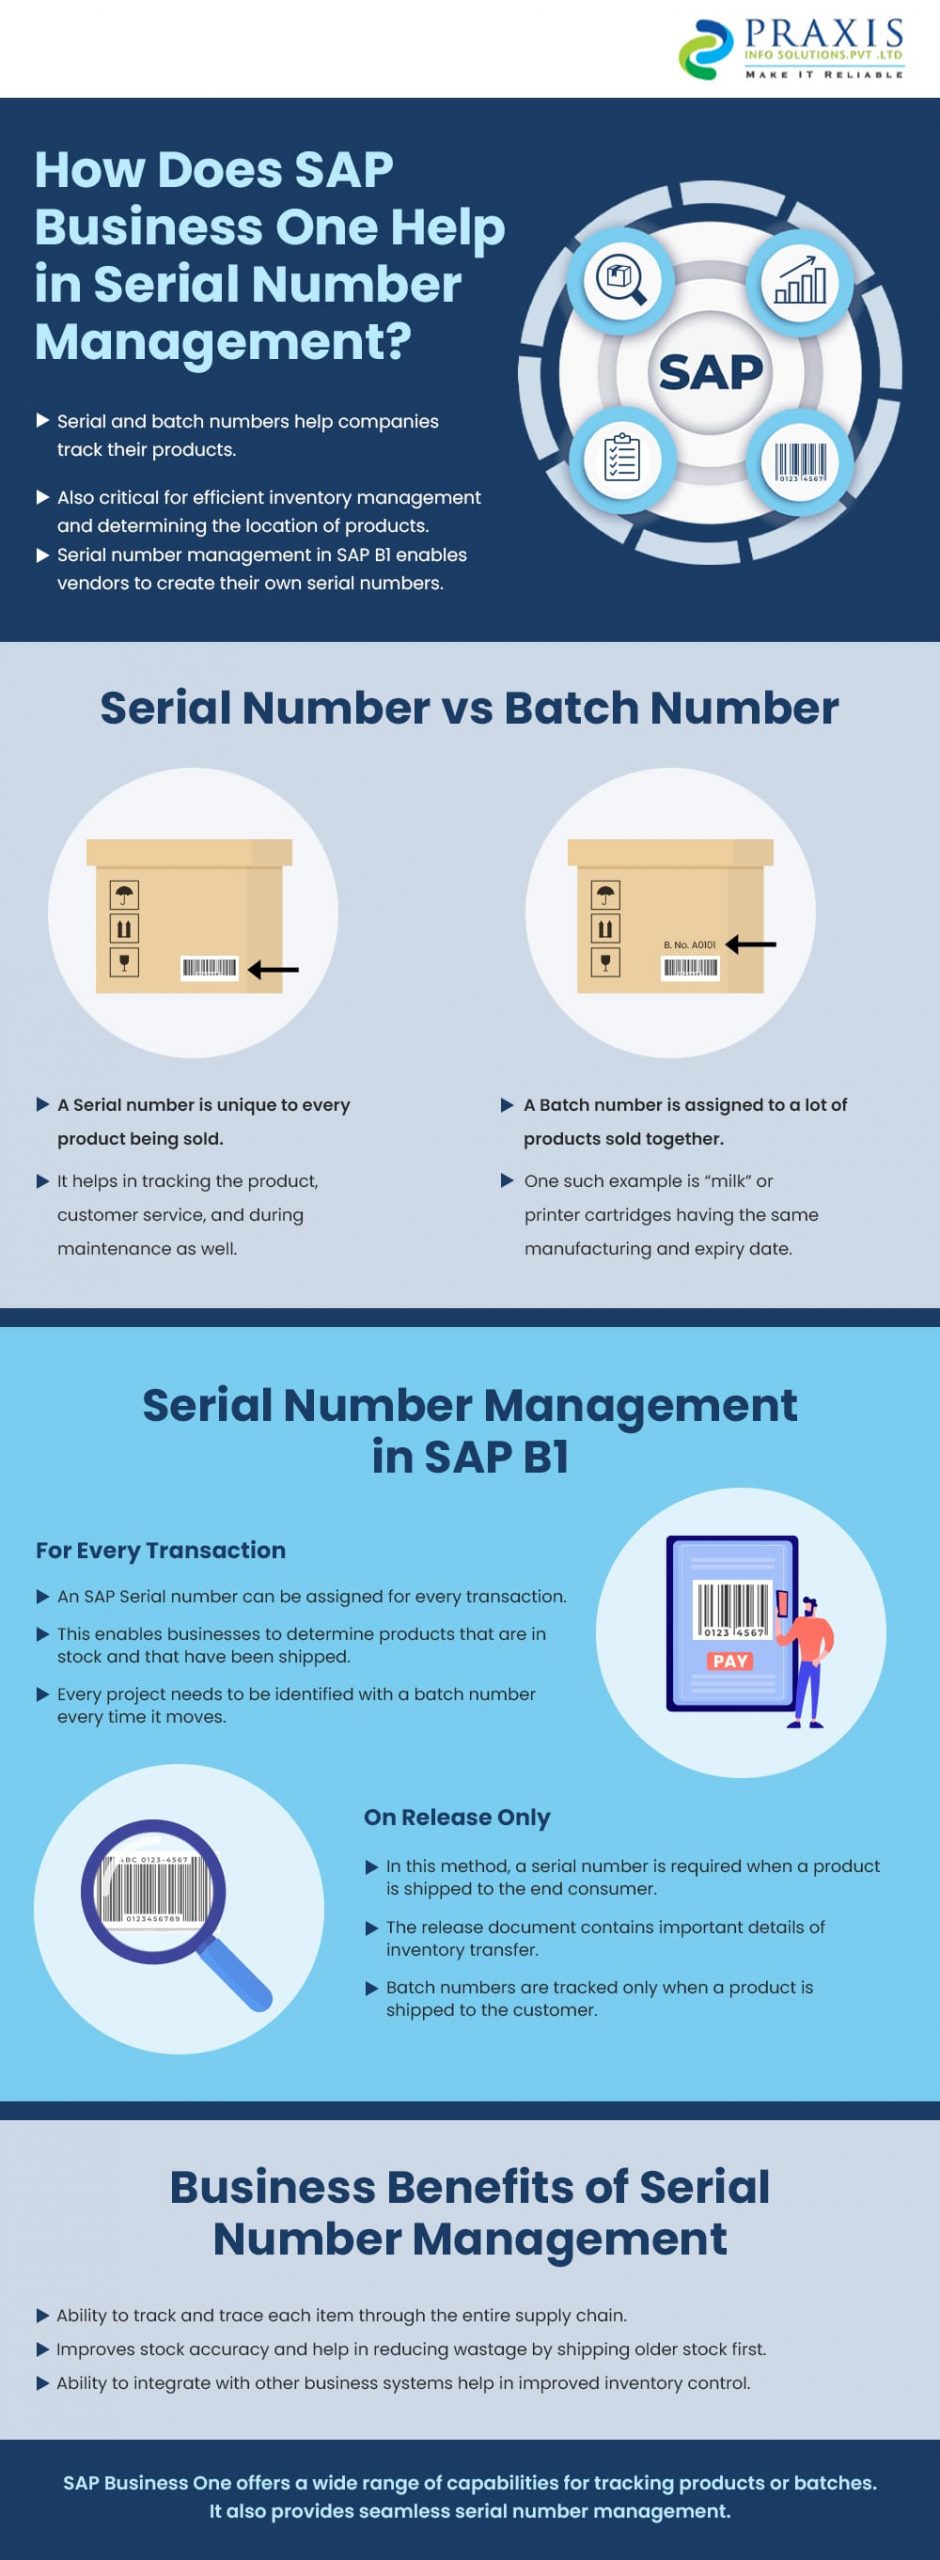 SAP Business One Help Serial Number Management